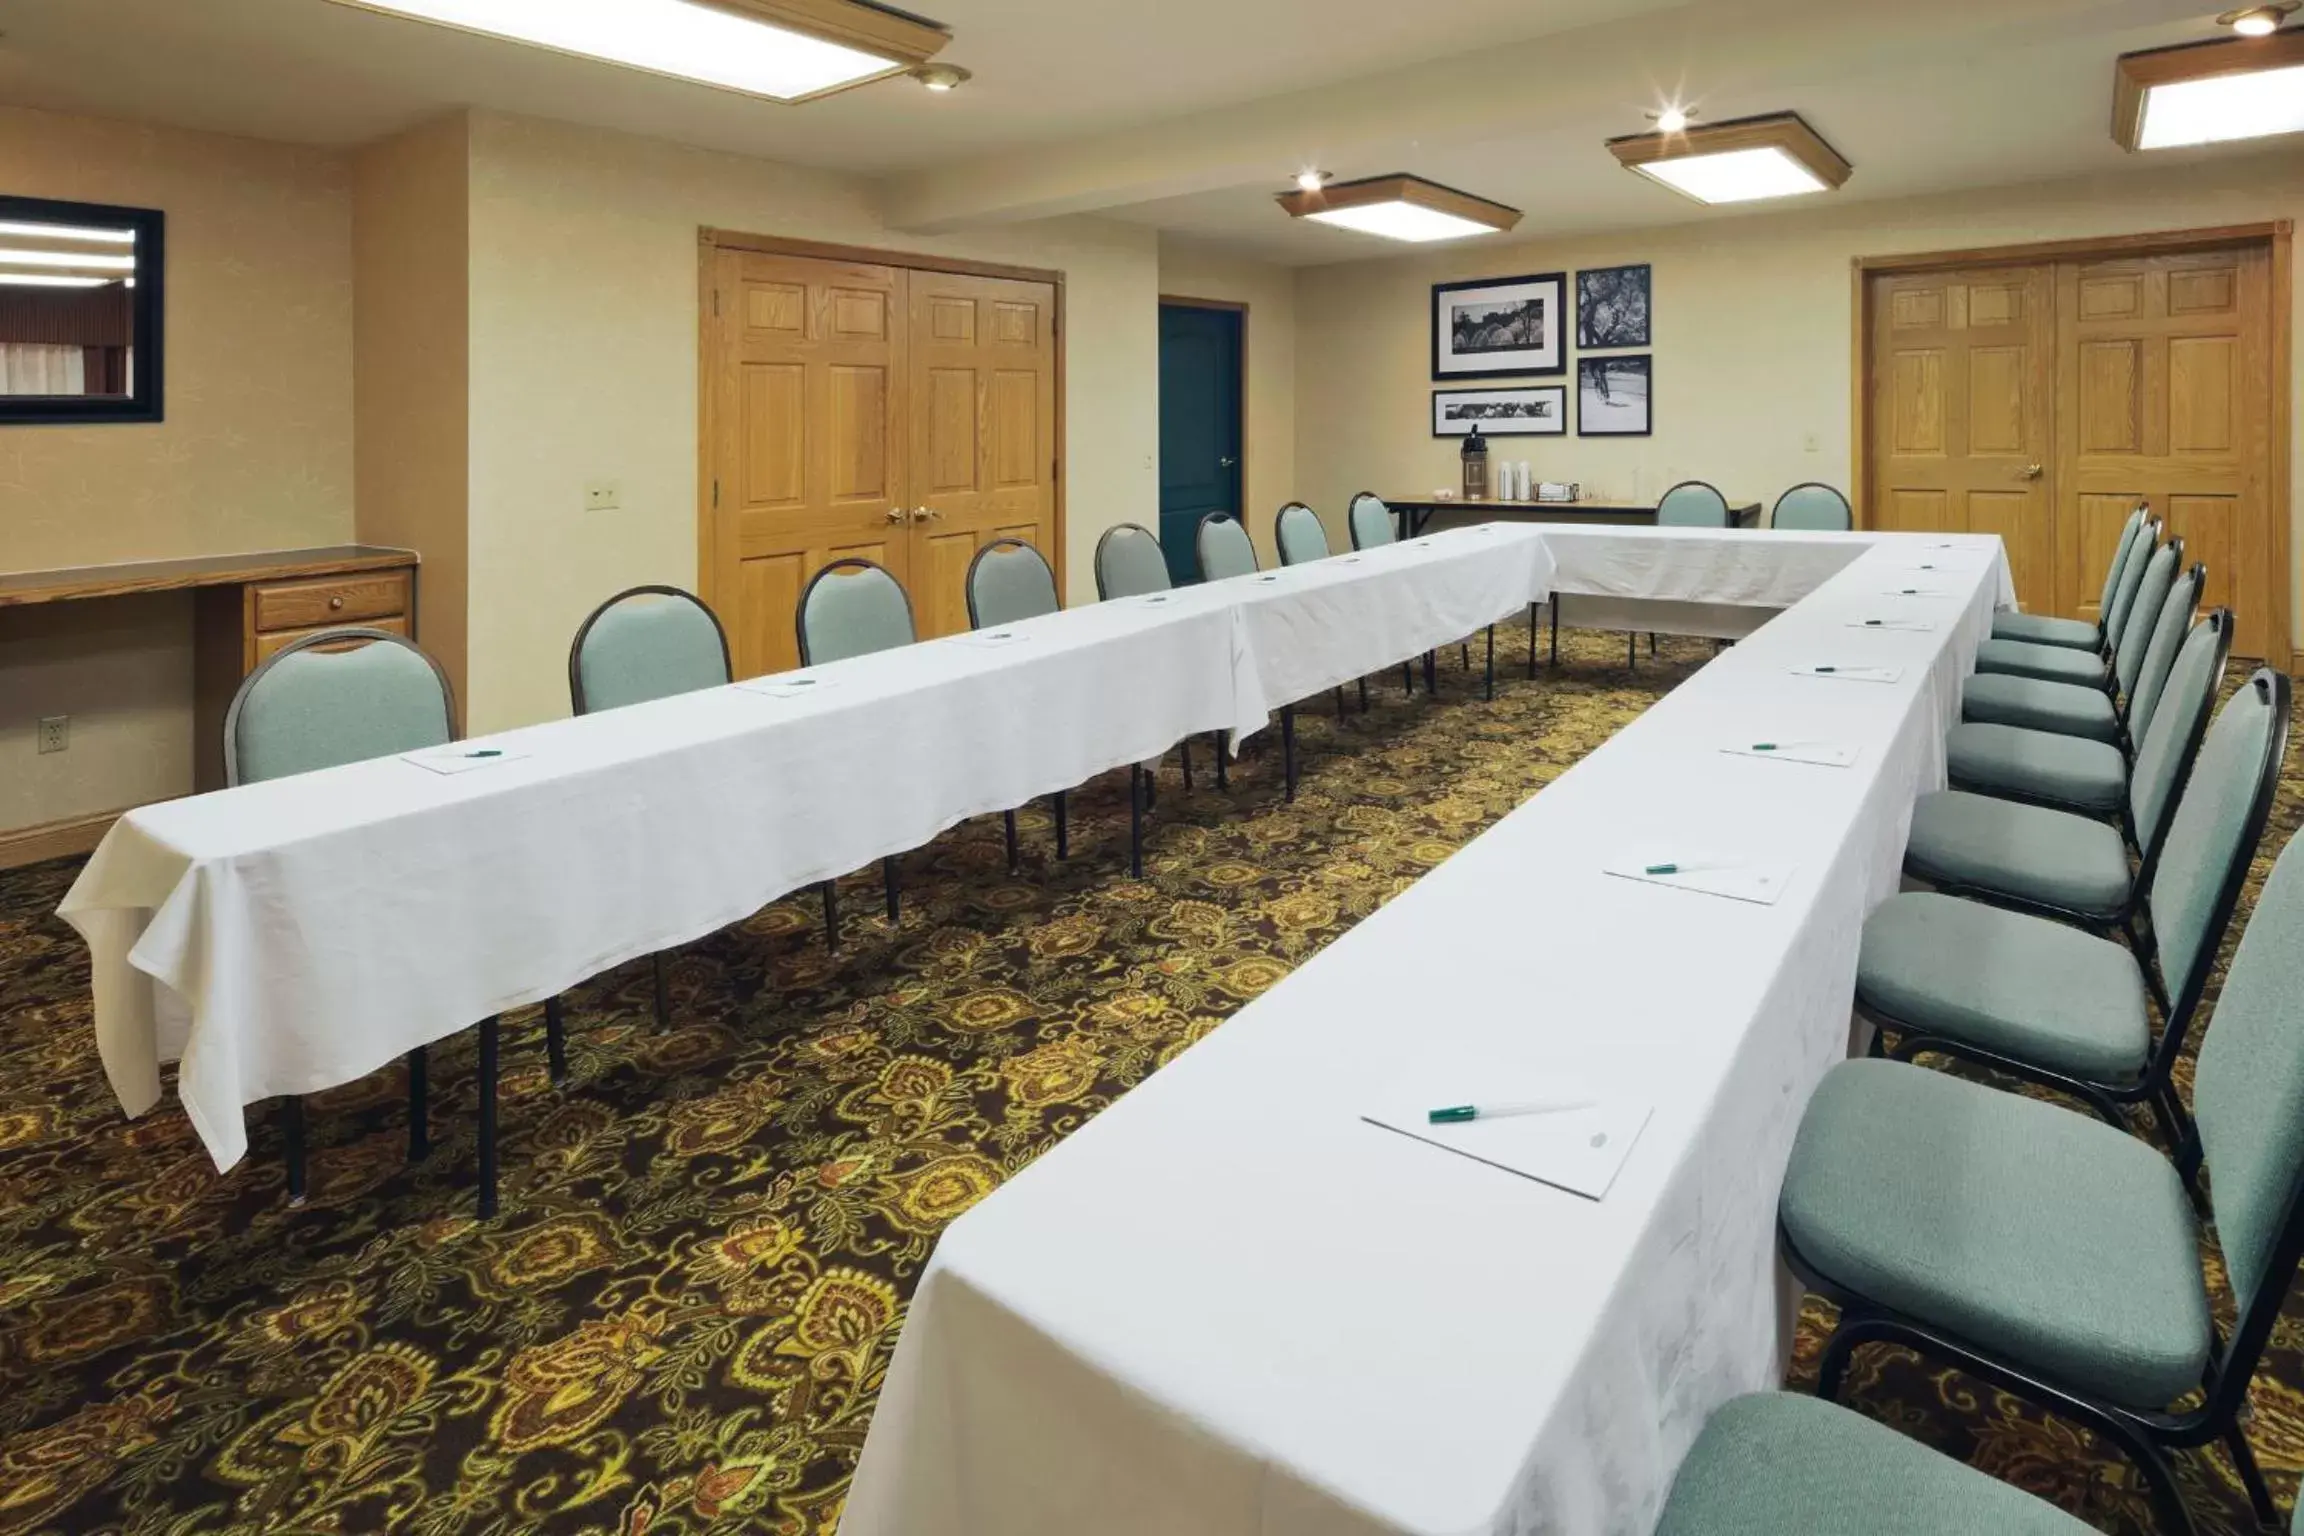 Meeting/conference room, Business Area/Conference Room in Country Inn & Suites by Radisson, Kenosha, WI